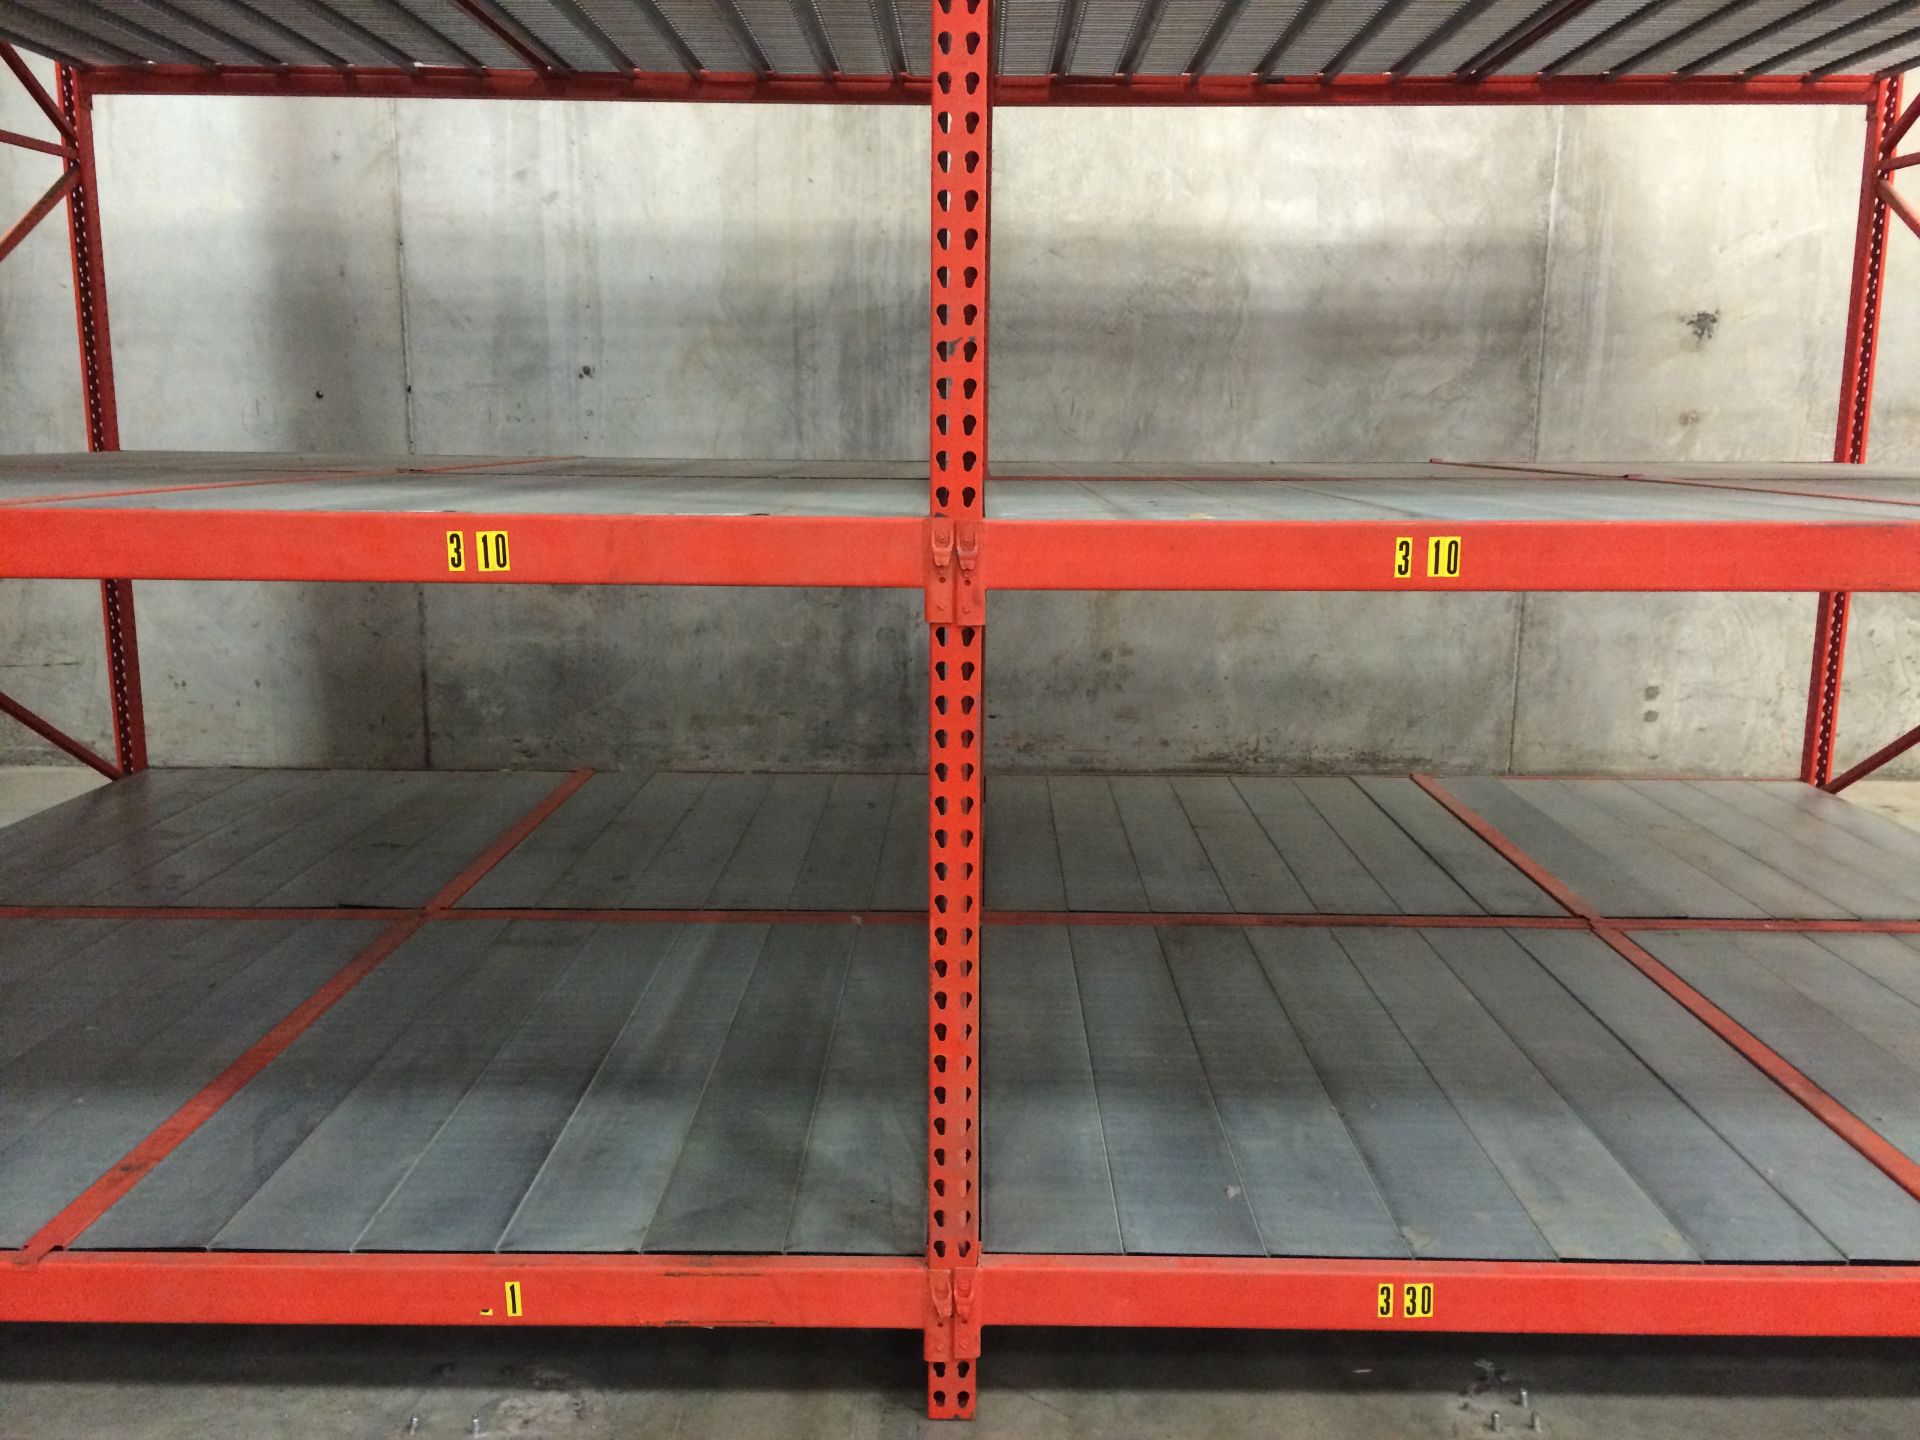 10 BAYS(100 LINEAR FT) OF CARPET STORAGE RACKS WITH PUNCHED DECKING, 4 SHELVES/BAY - Image 6 of 13